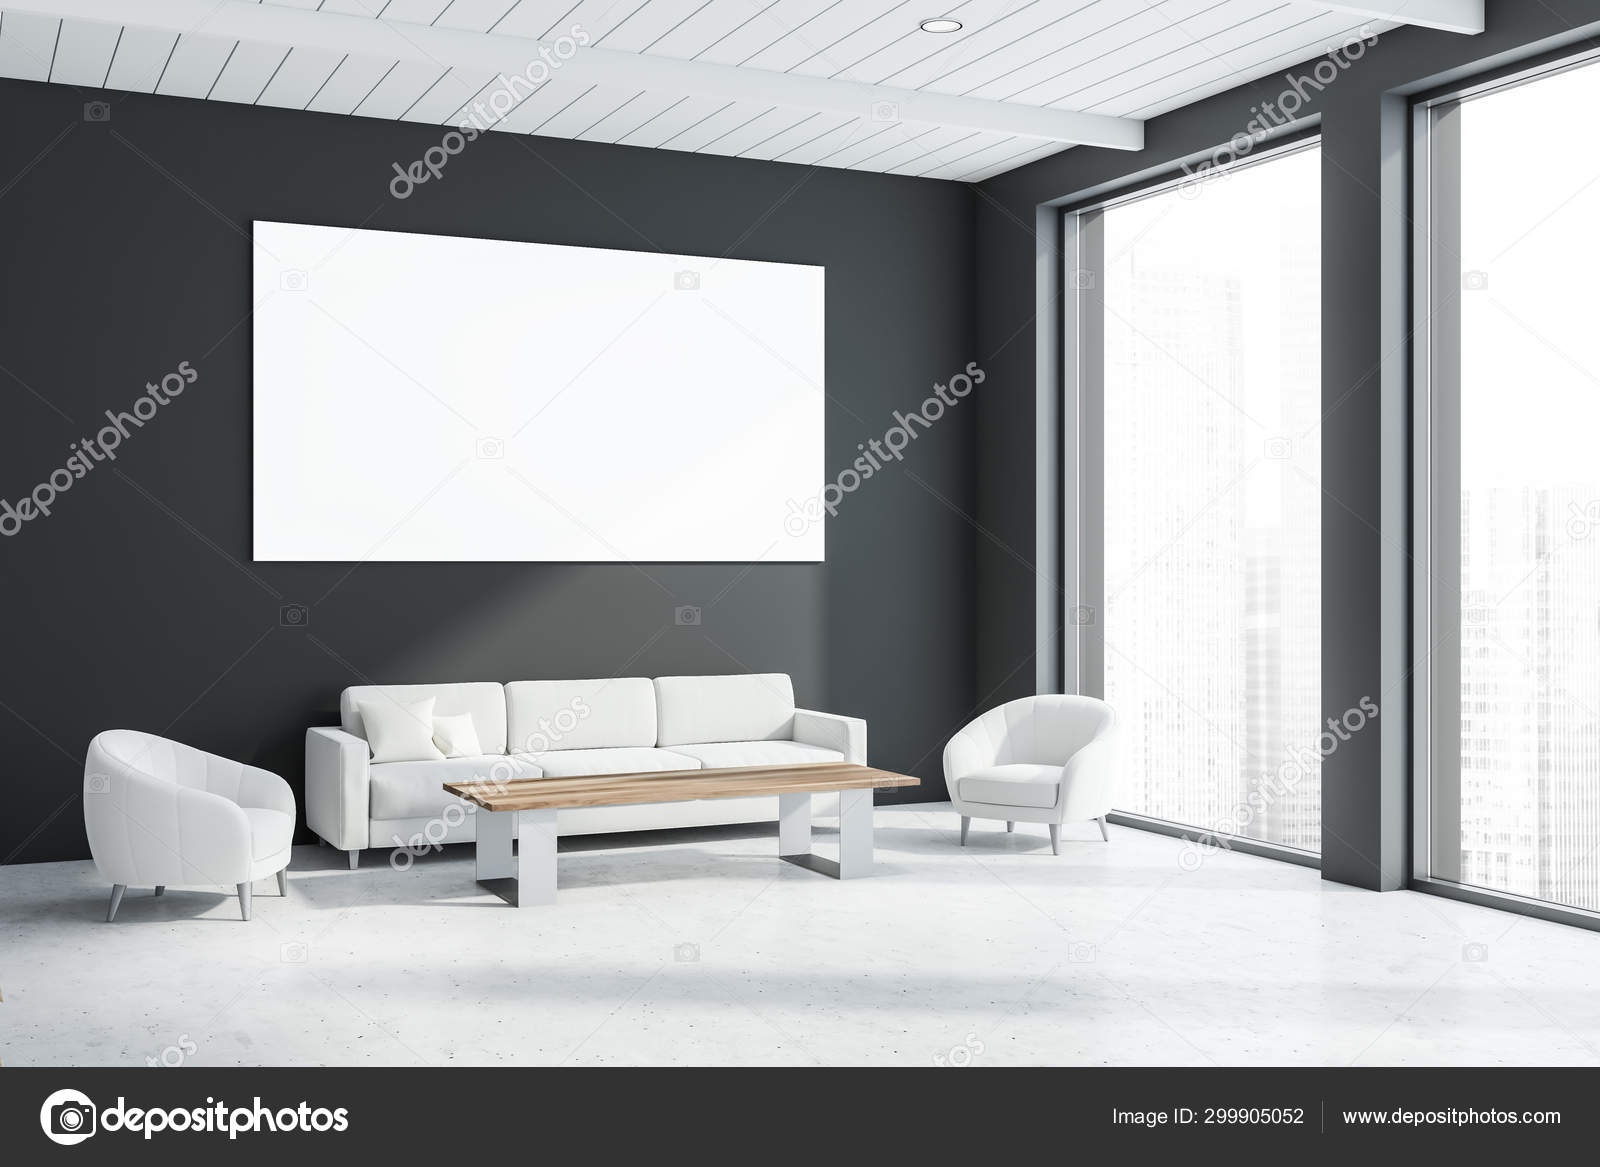 Download Gray Office Waiting Room Corner With Poster Stock Photo Image By C Denisismagilov 299905052